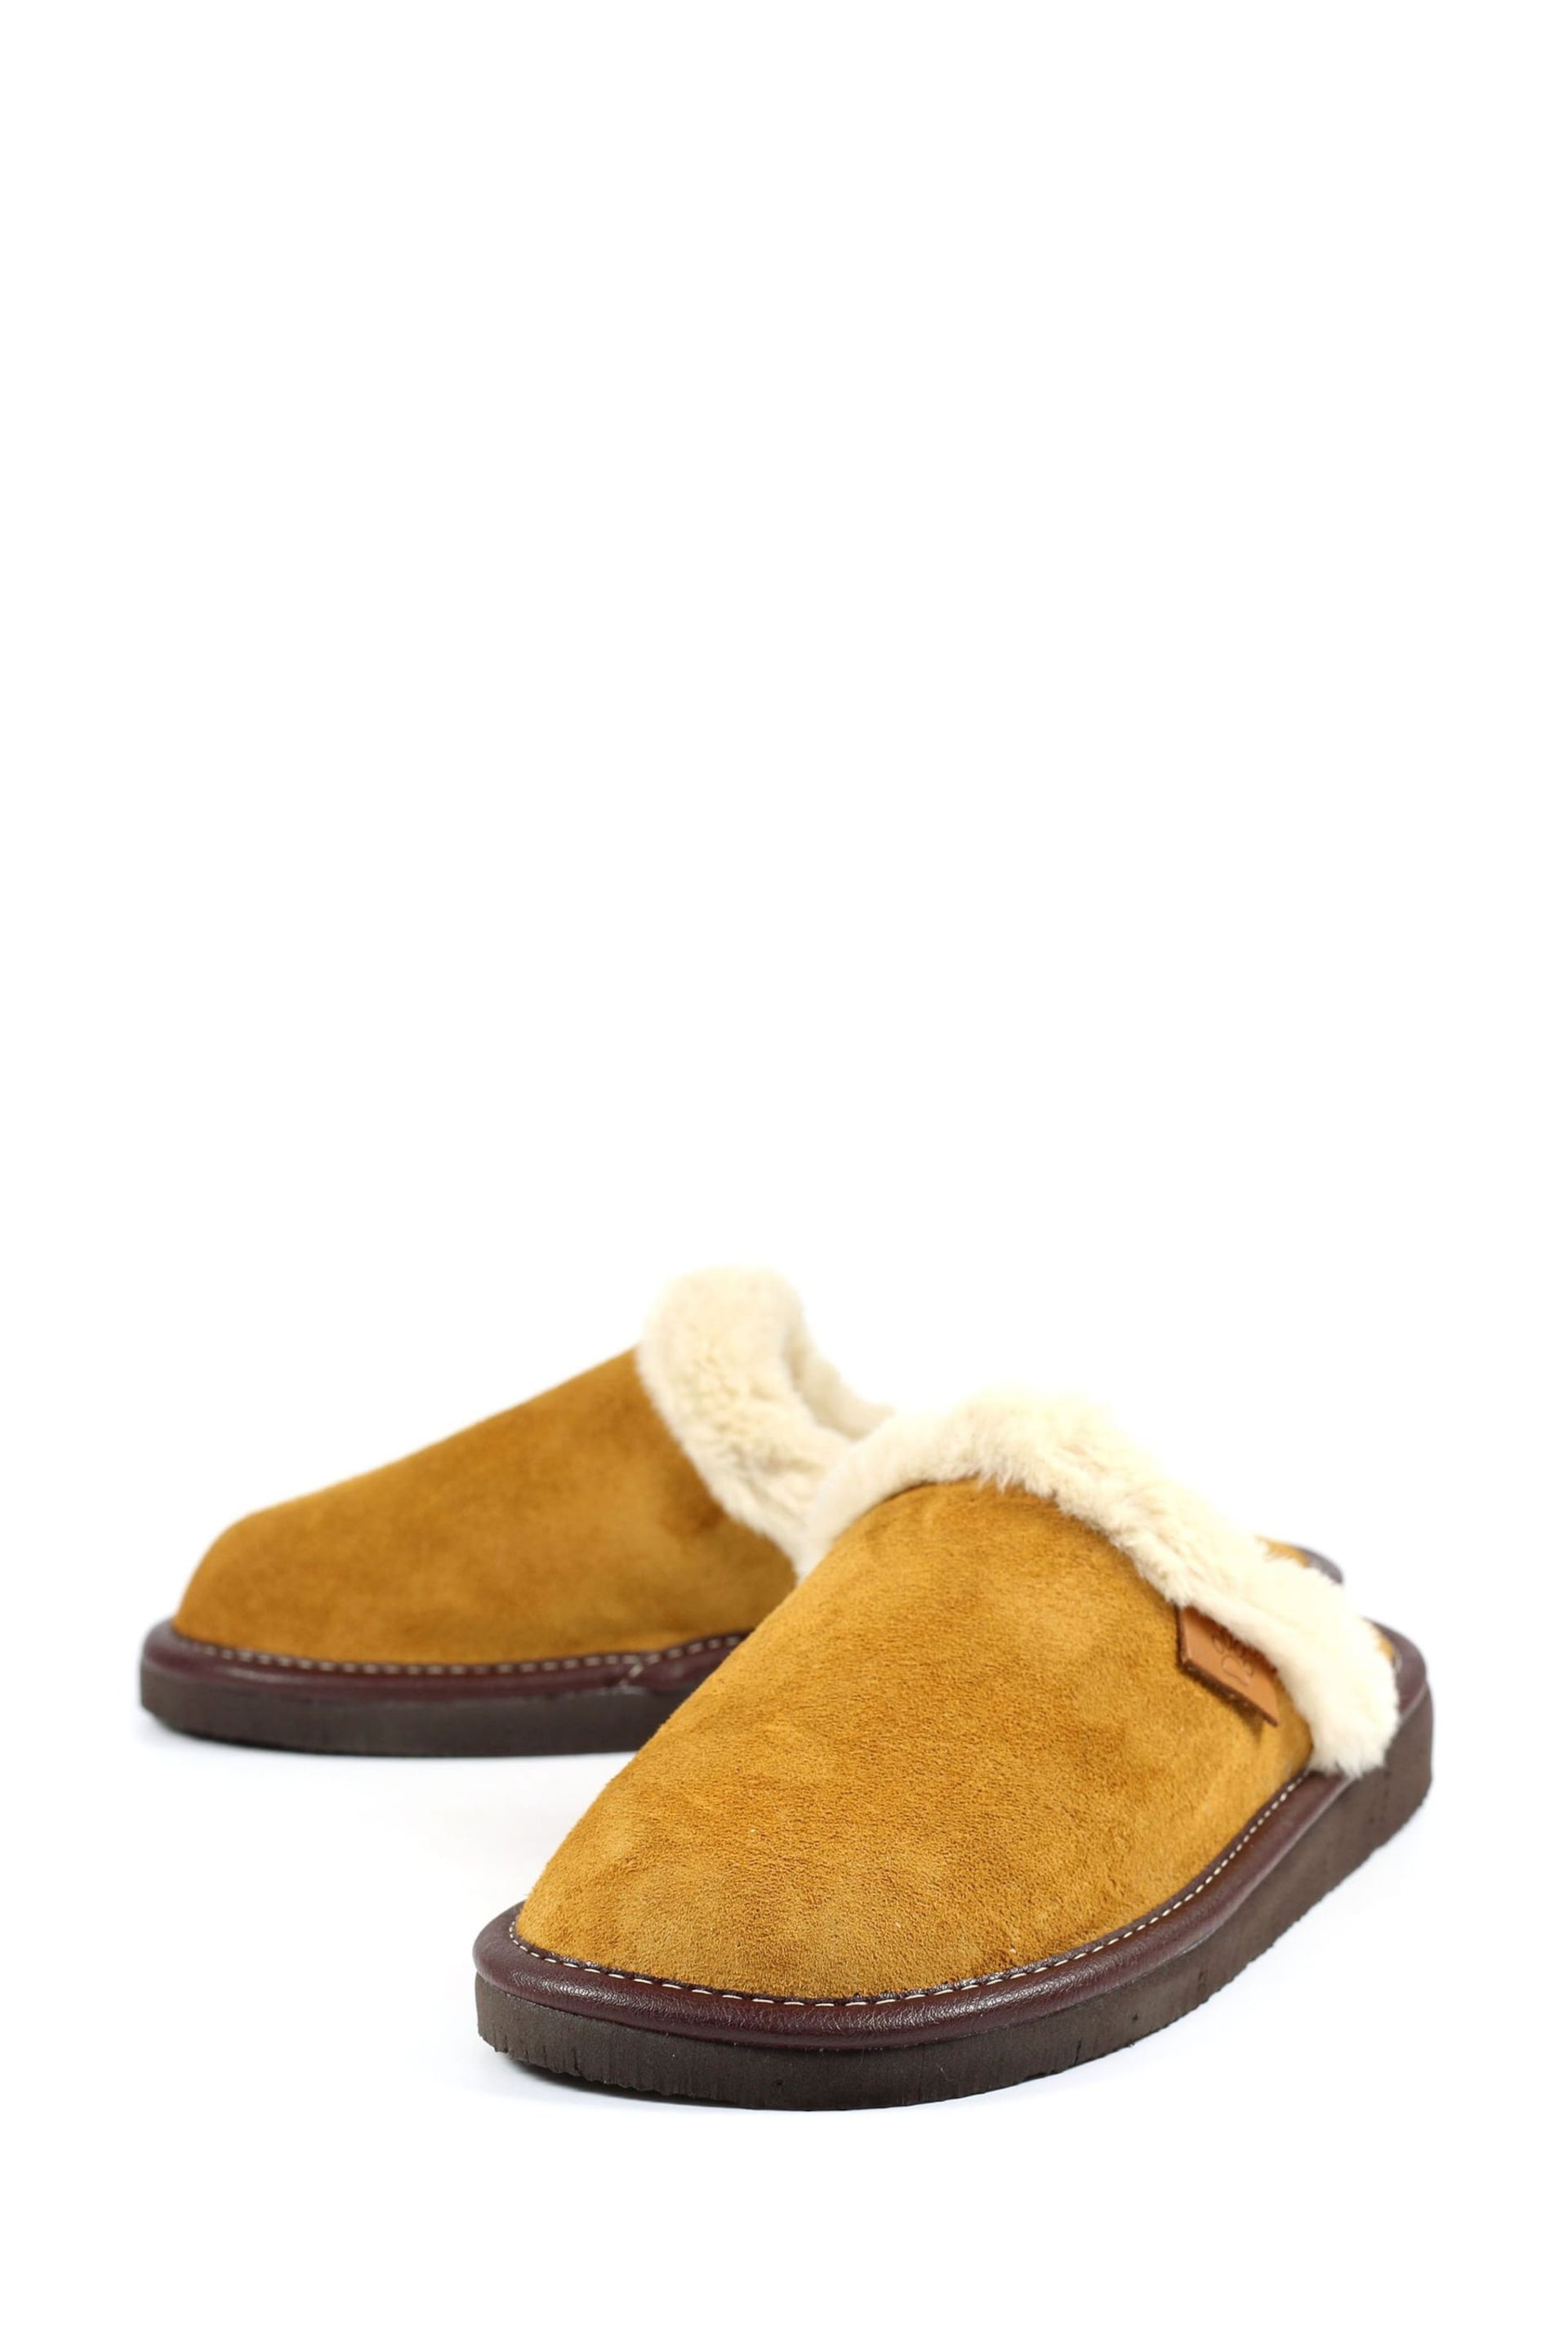 Lunar Lazy Dogz Otto Suede Mule Slippers - Image 6 of 9